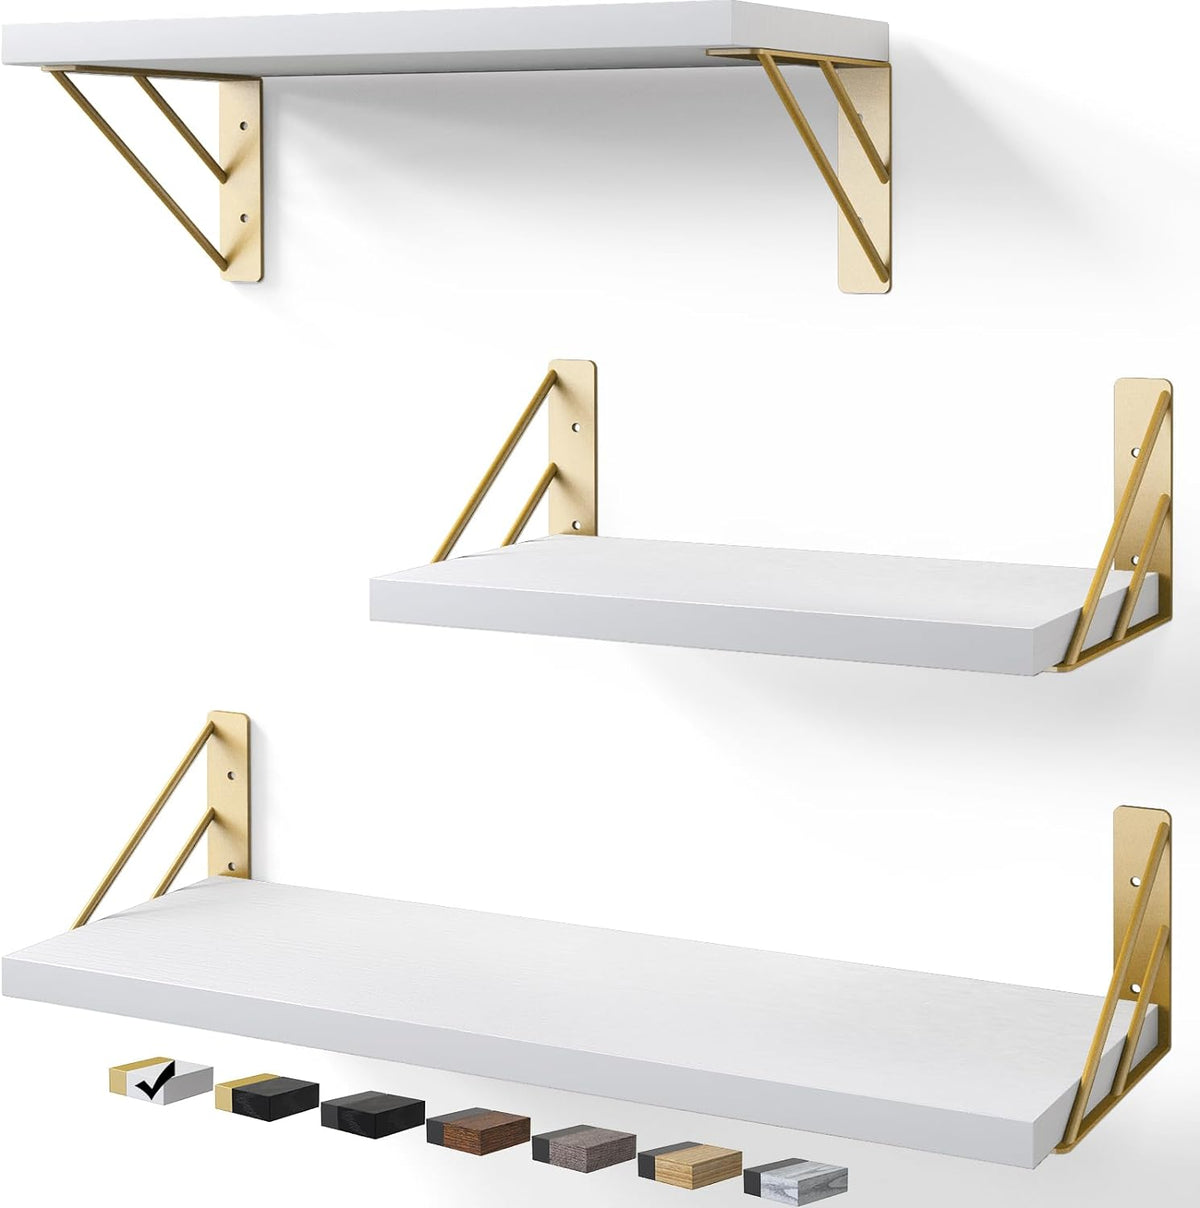 BAYKA Wall Shelves for Bedroom Decor, Floating Wall Shelves-3pcs-White and Gold